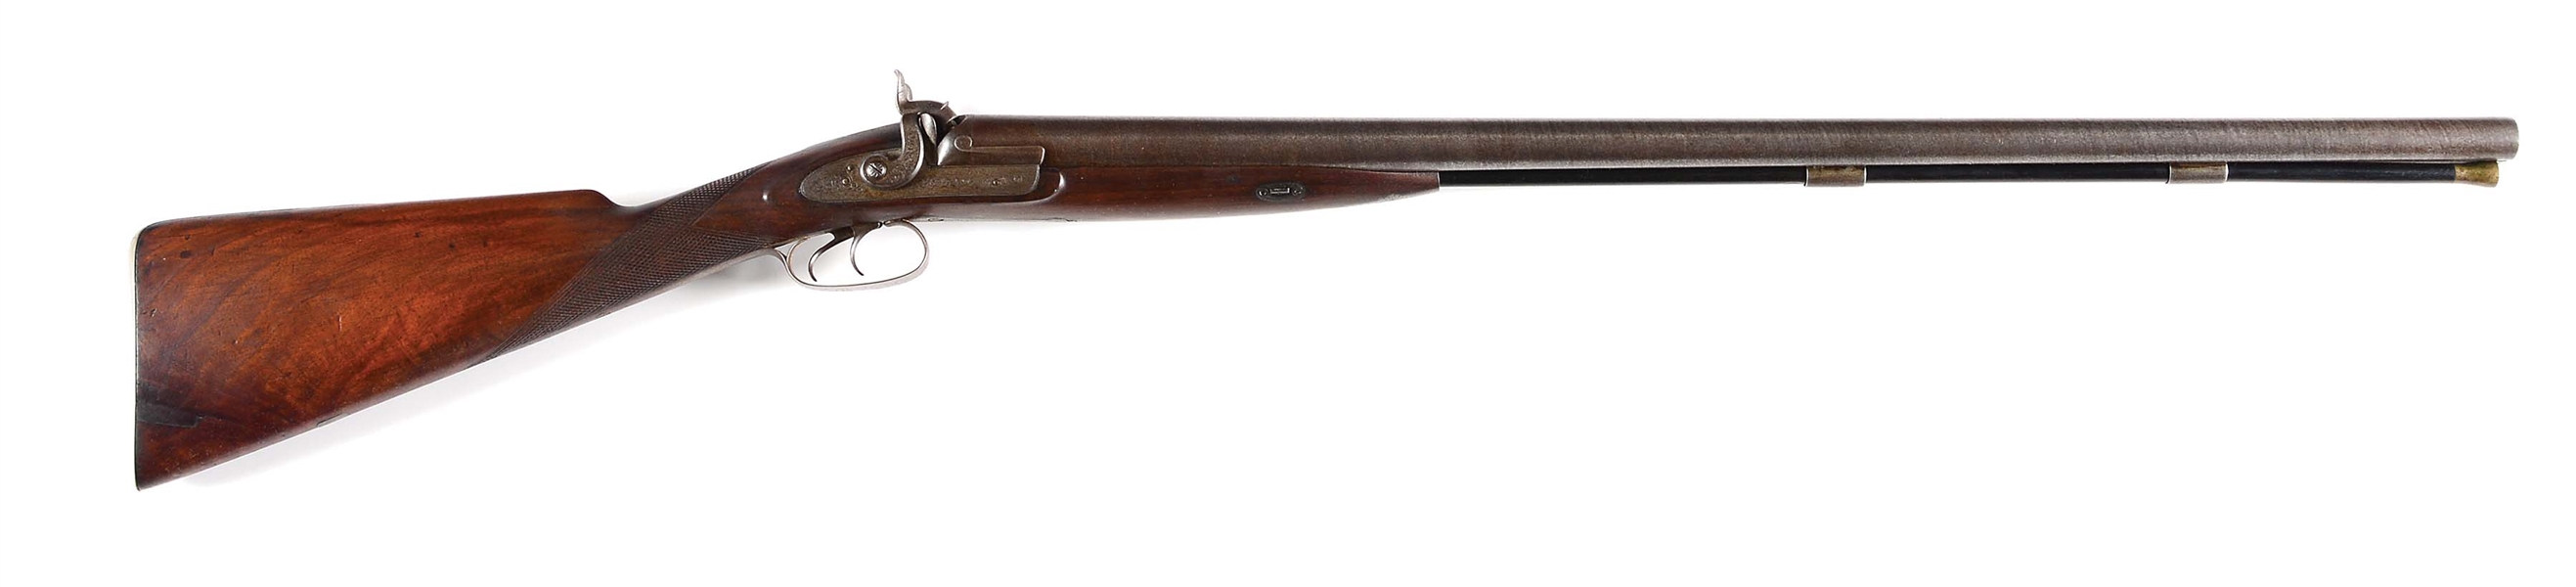 (A) BALES IPSWICH SIDE BY SIDE 8 BORE MUZZLELOADING PERCUSSION SHOTGUN